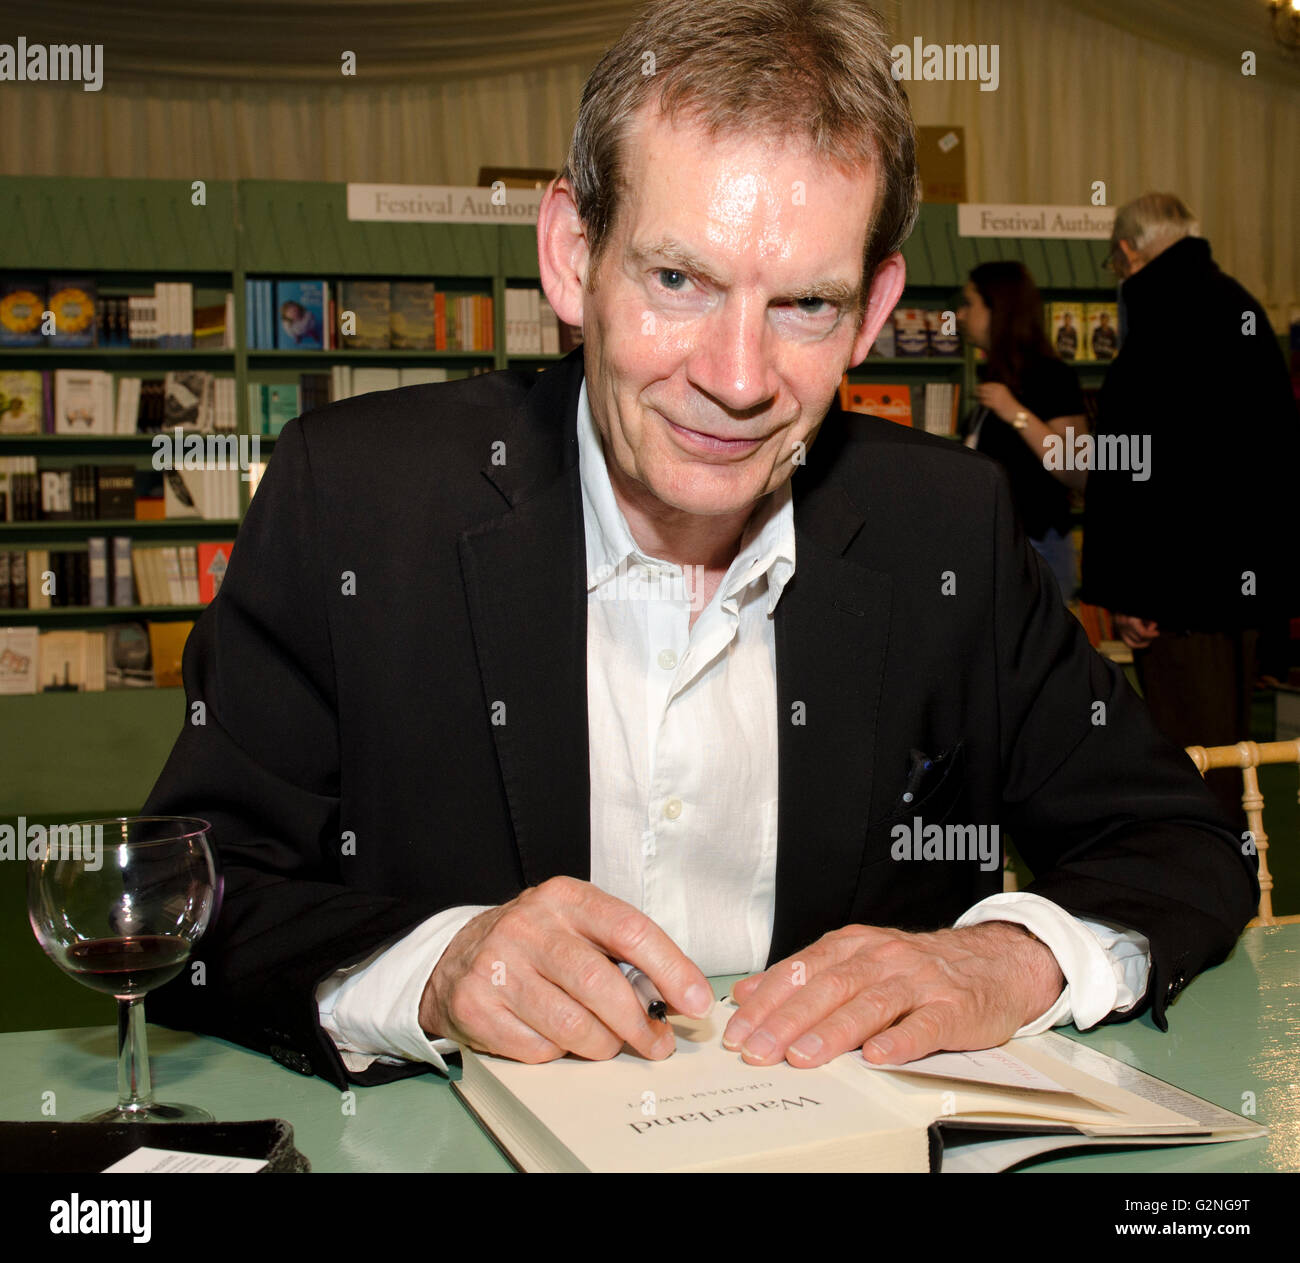 Graham Swift, novelist, author of Waterland and Man Booker prize winner 1996 for Last Orders, signing new novel Mothering Sunday Stock Photo